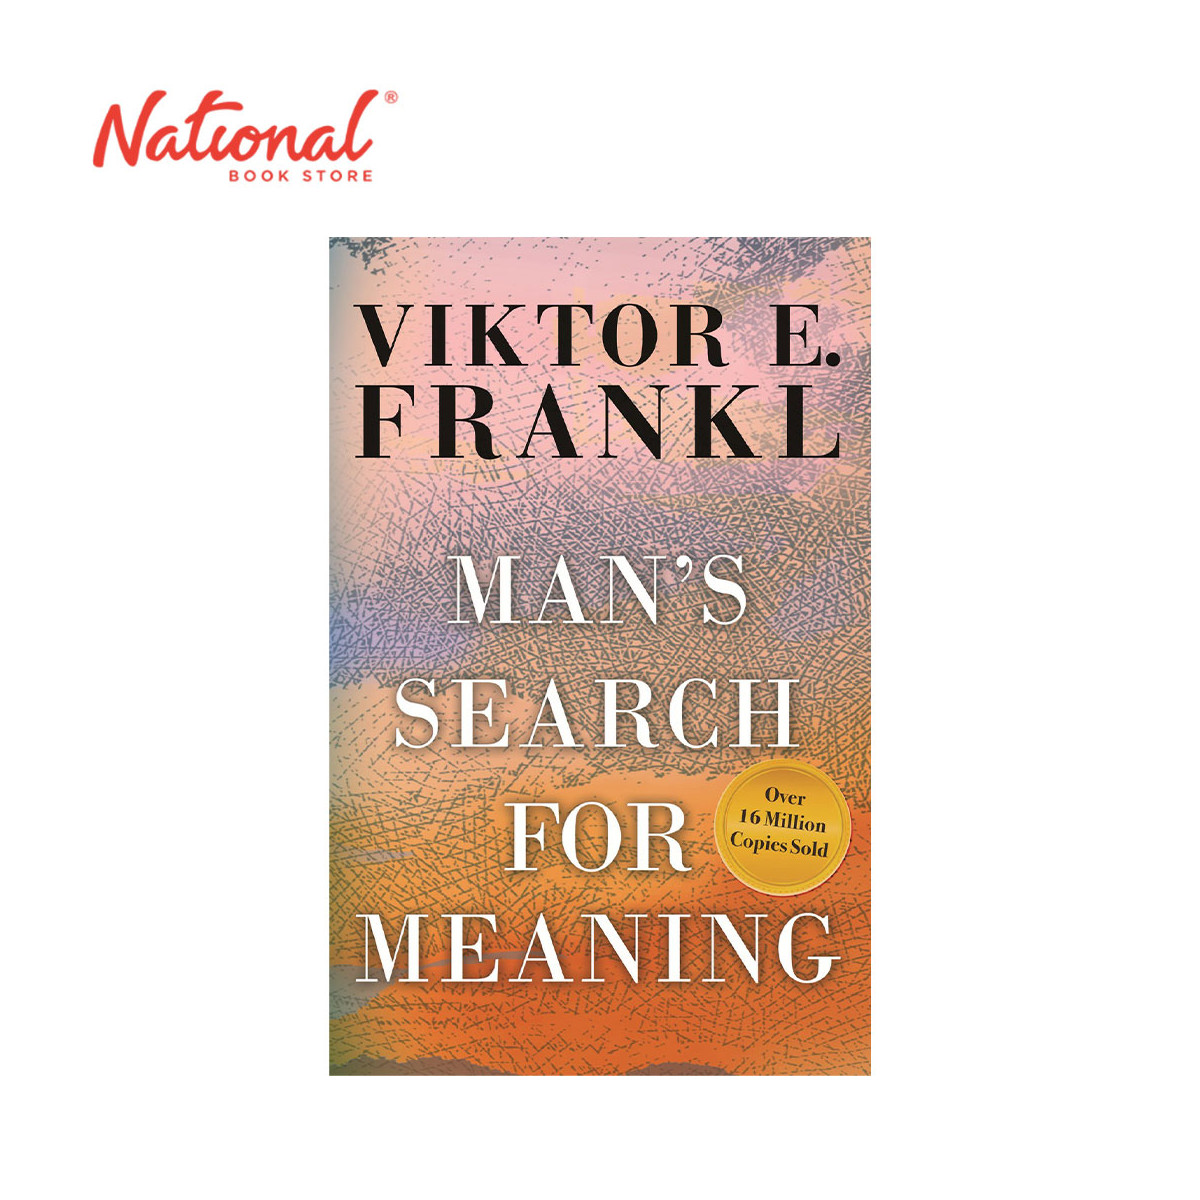 Man's Search For Meaning by Viktor Frankl - Trade Paperback - Self-Help Books